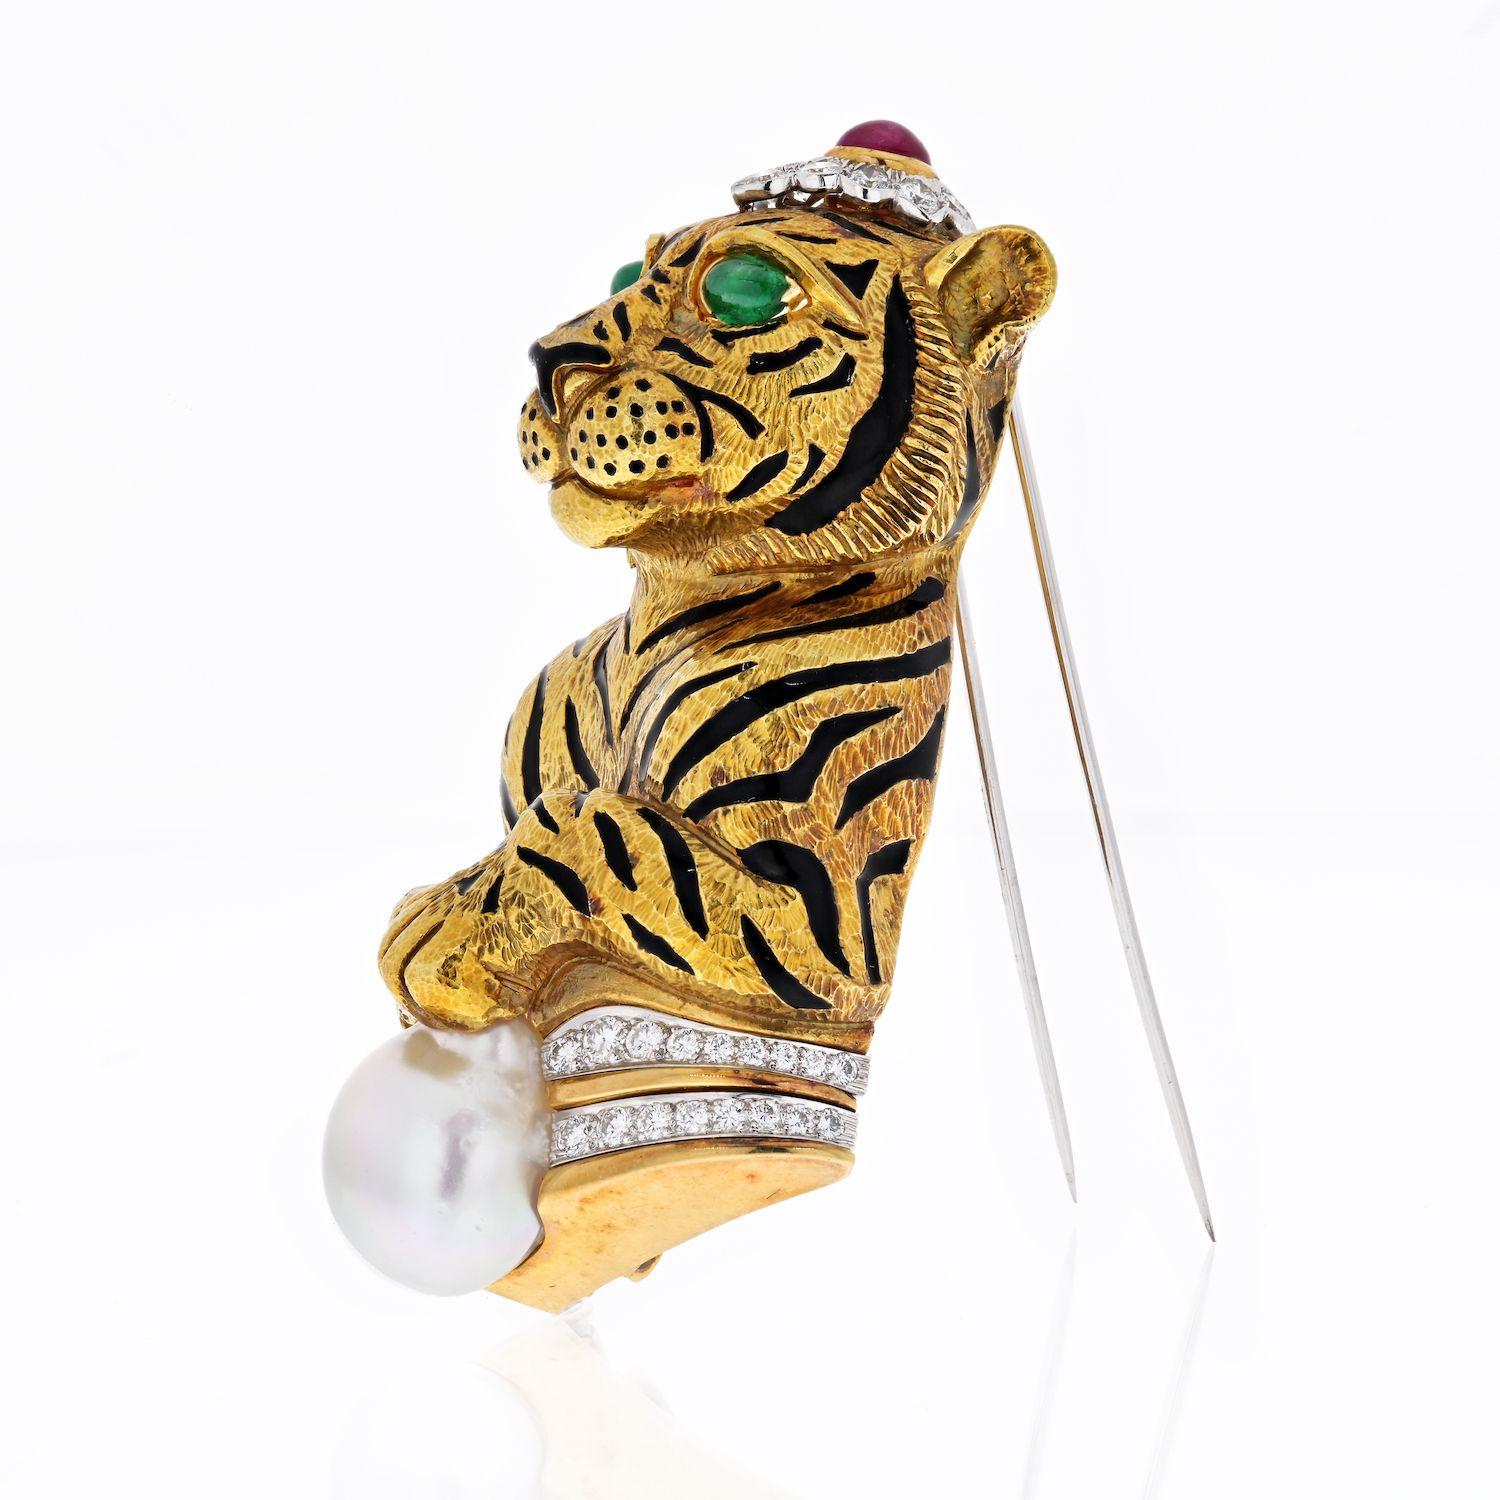 Designed as a tiger, the body decorated with textured gold fur, enhanced with black enamel stripes, with circular-cut diamonds, emerald eyes, cabochon ruby atop of the head. Tiger is holding a cultured baroque pearl, mounted in 18K yellow gold and